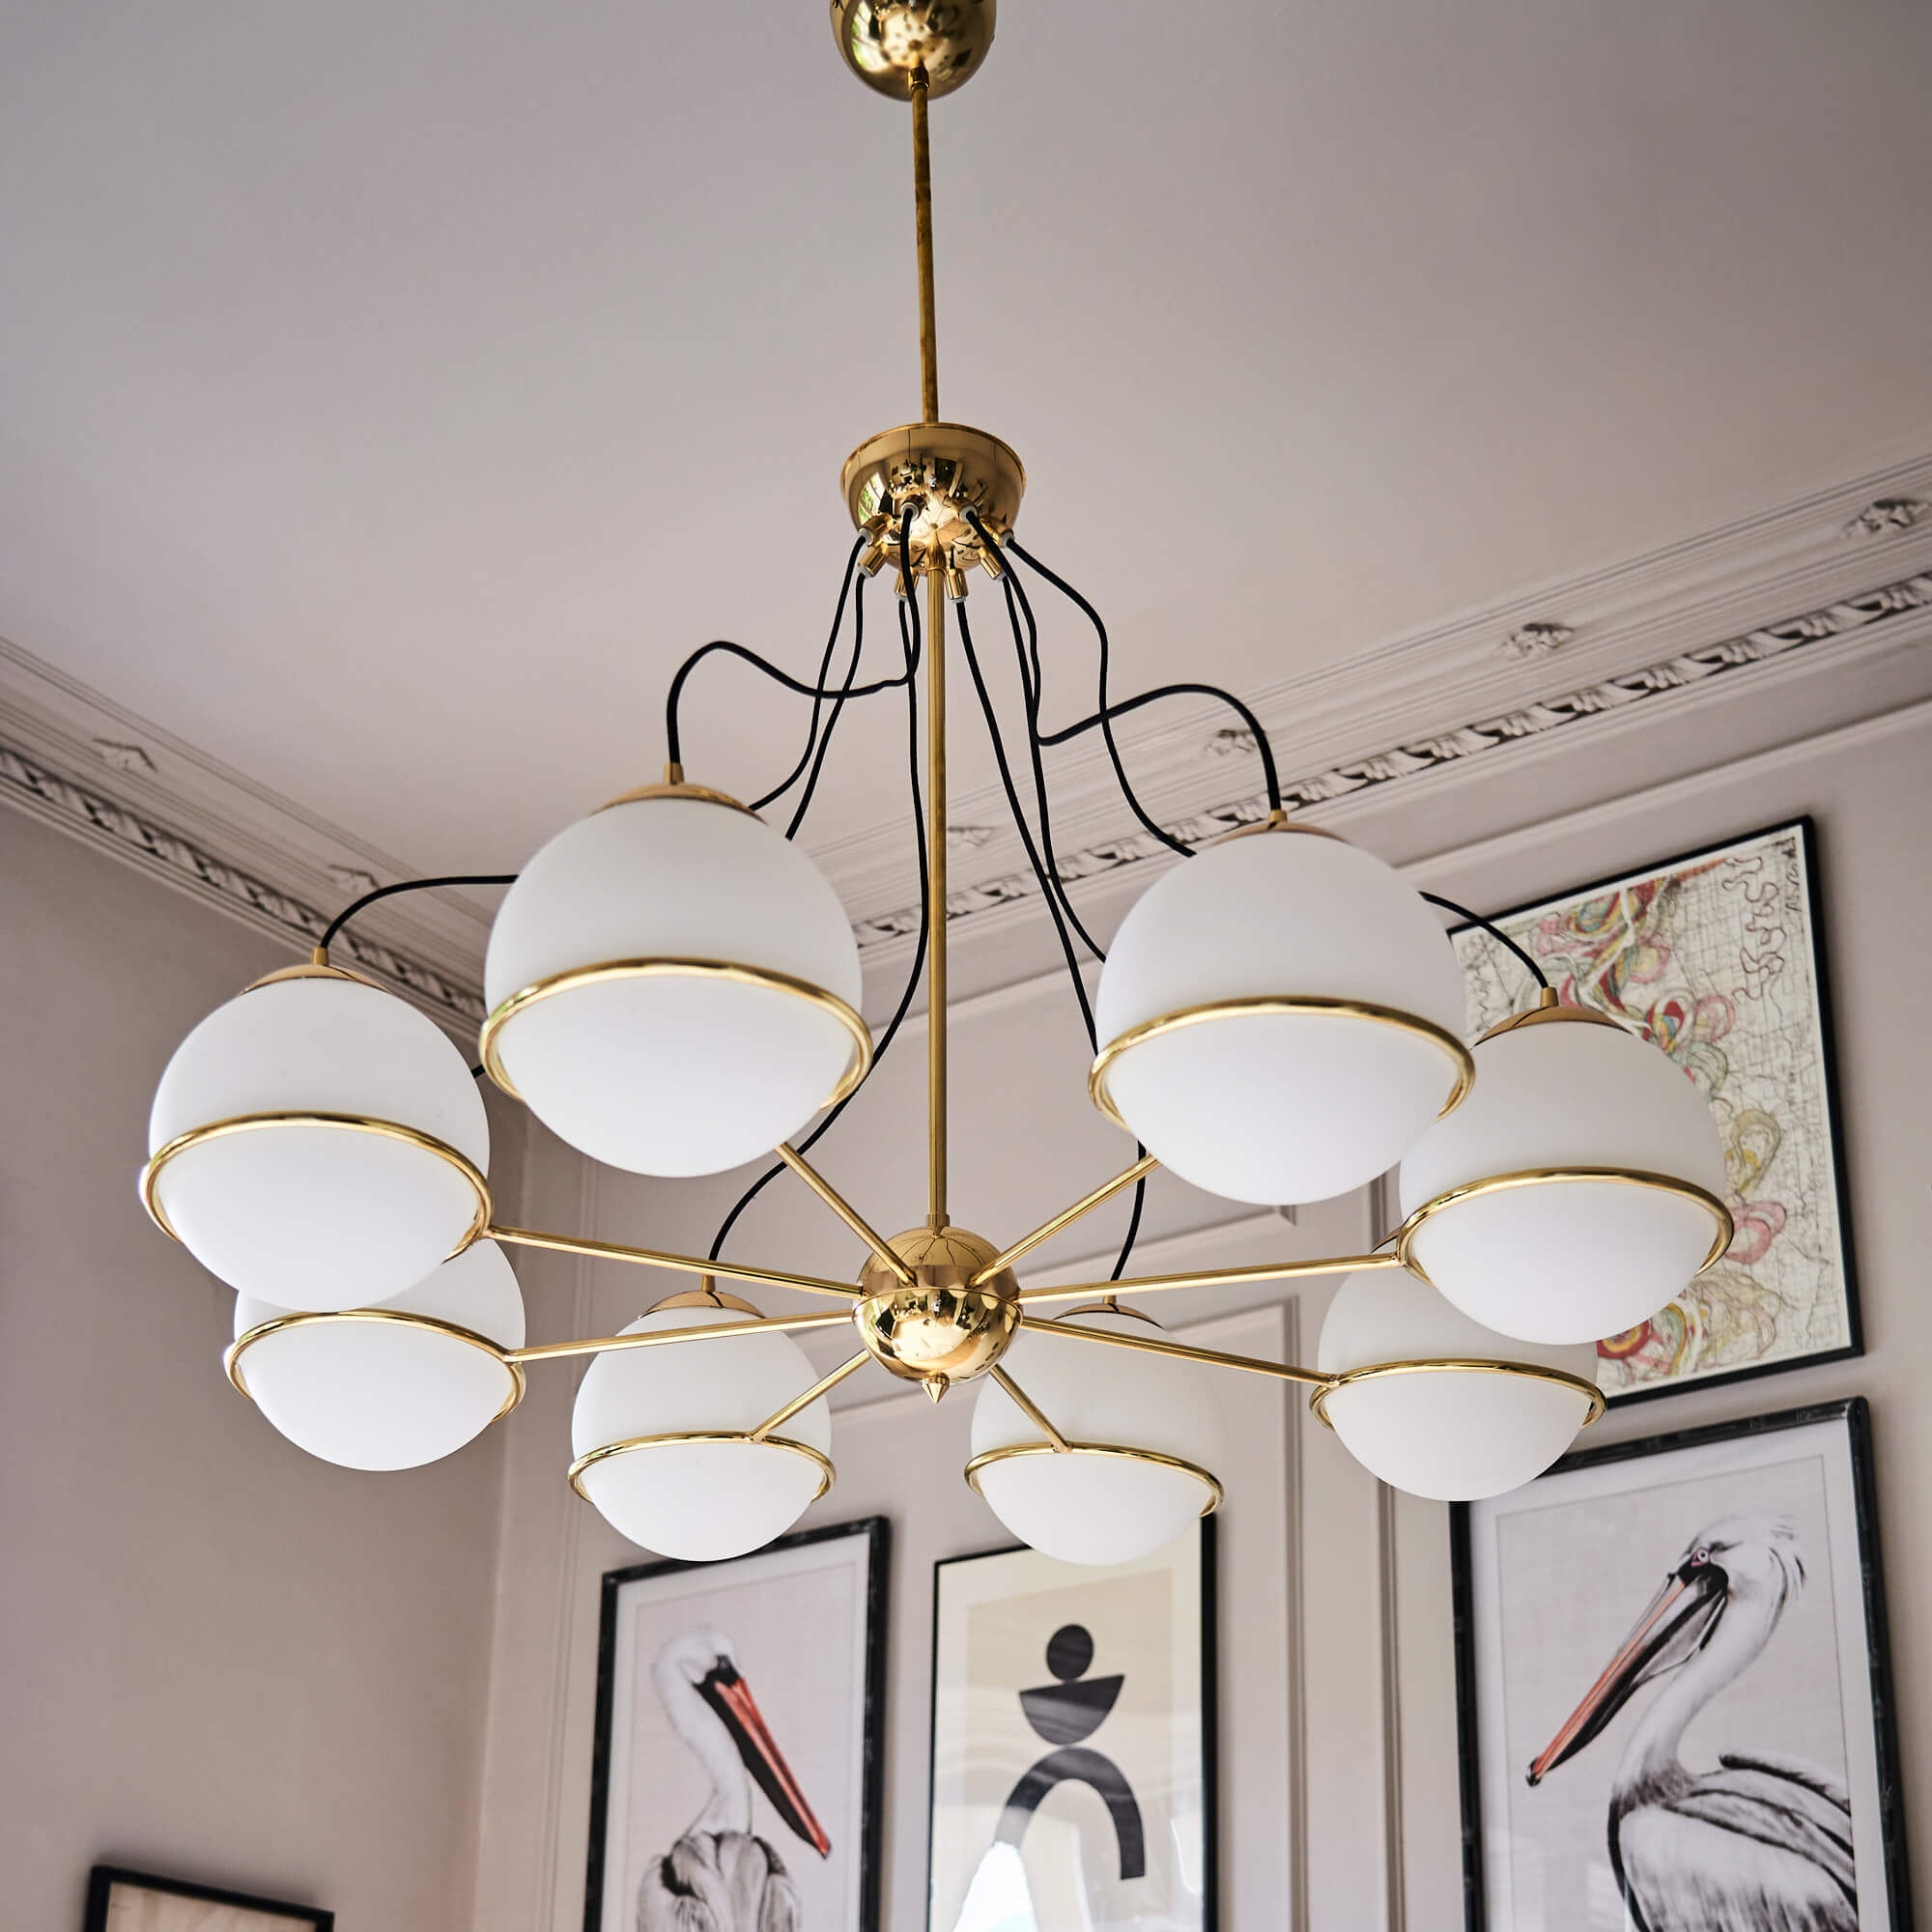 Read more about Graham and green isabella globe chandelier